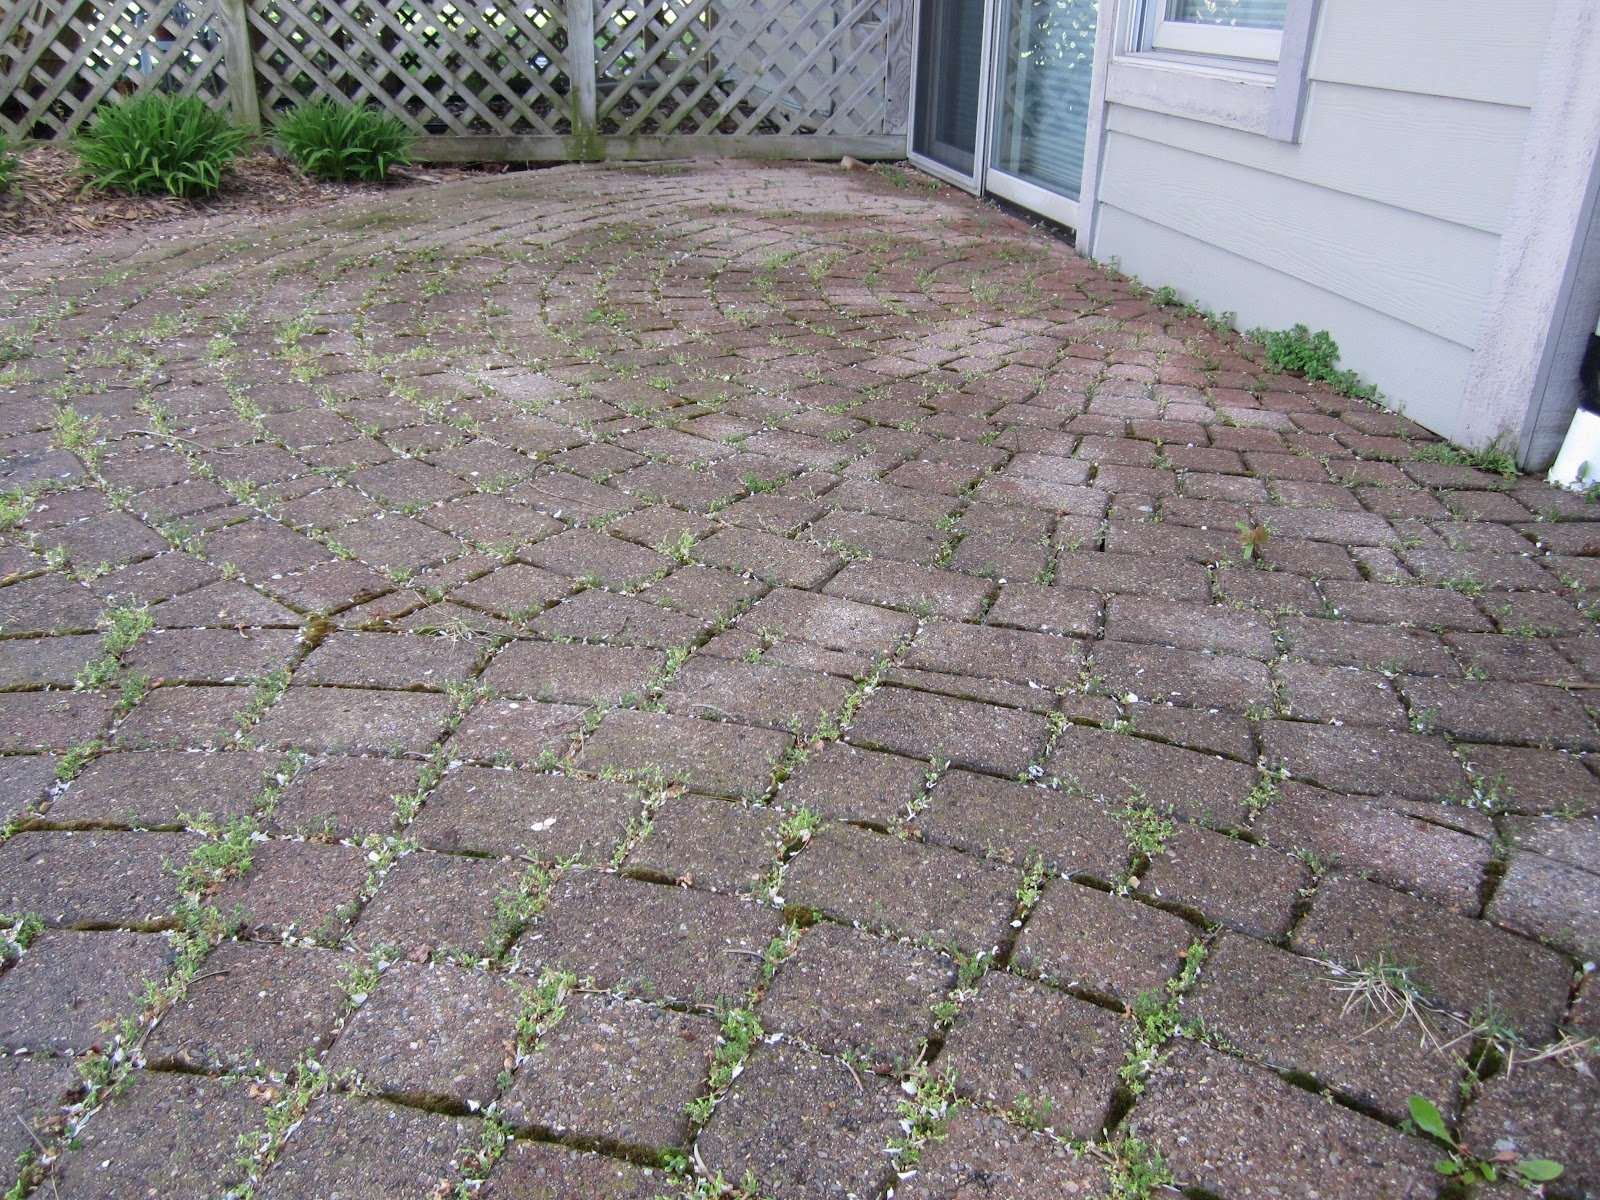 How To Clean Patio Pavers